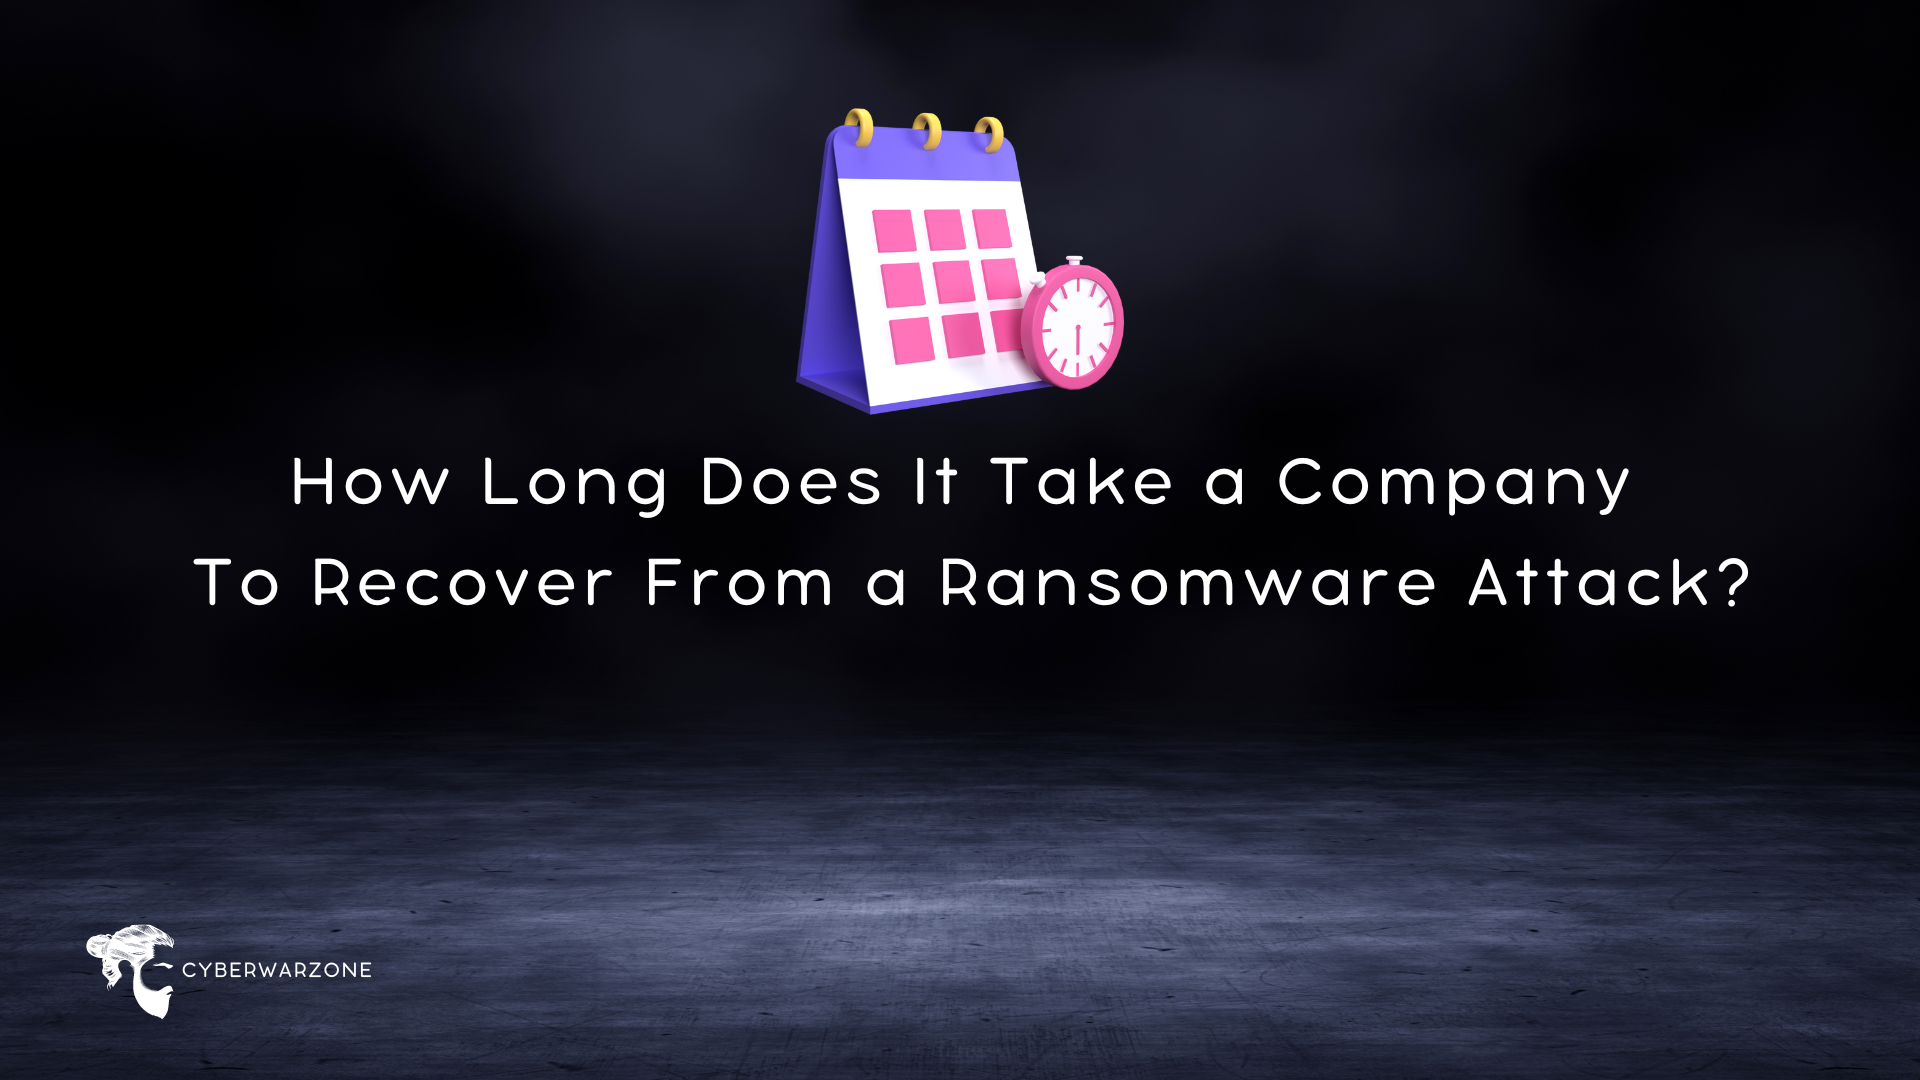 How Long Does It Take a Company To Recover From a Ransomware Attack?